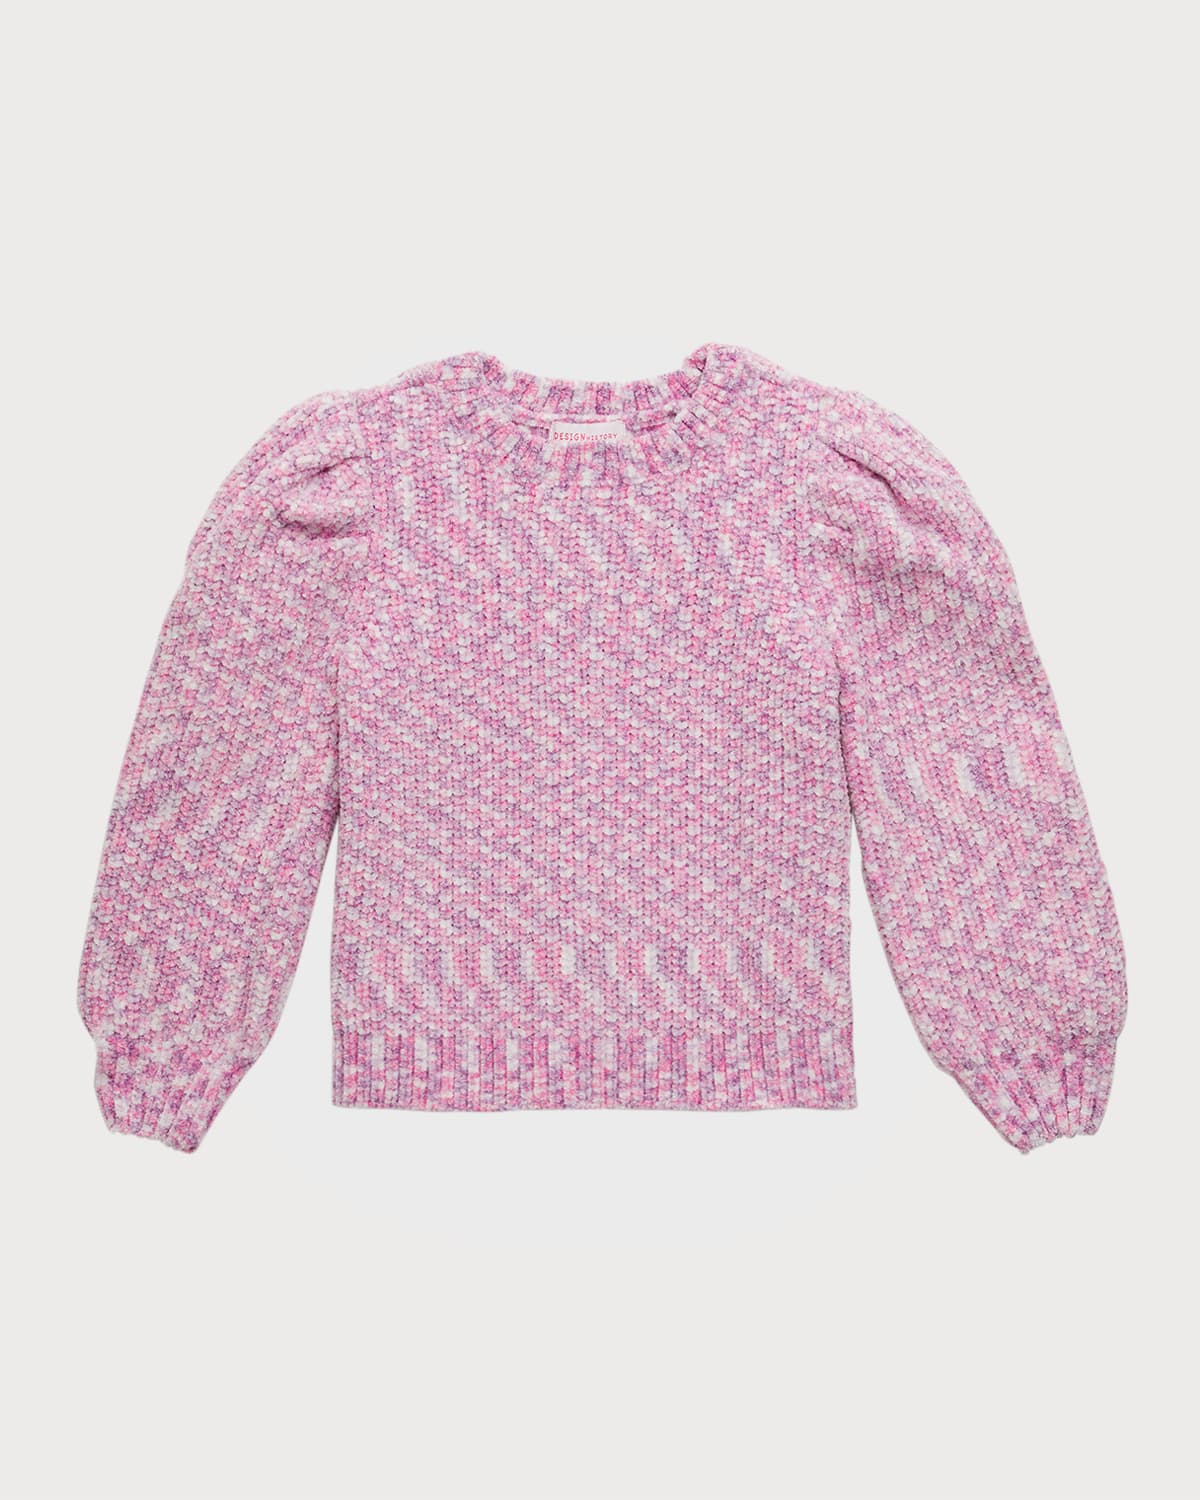 Girl's Puff Sleeve Knit Sweater, Size 4-6X